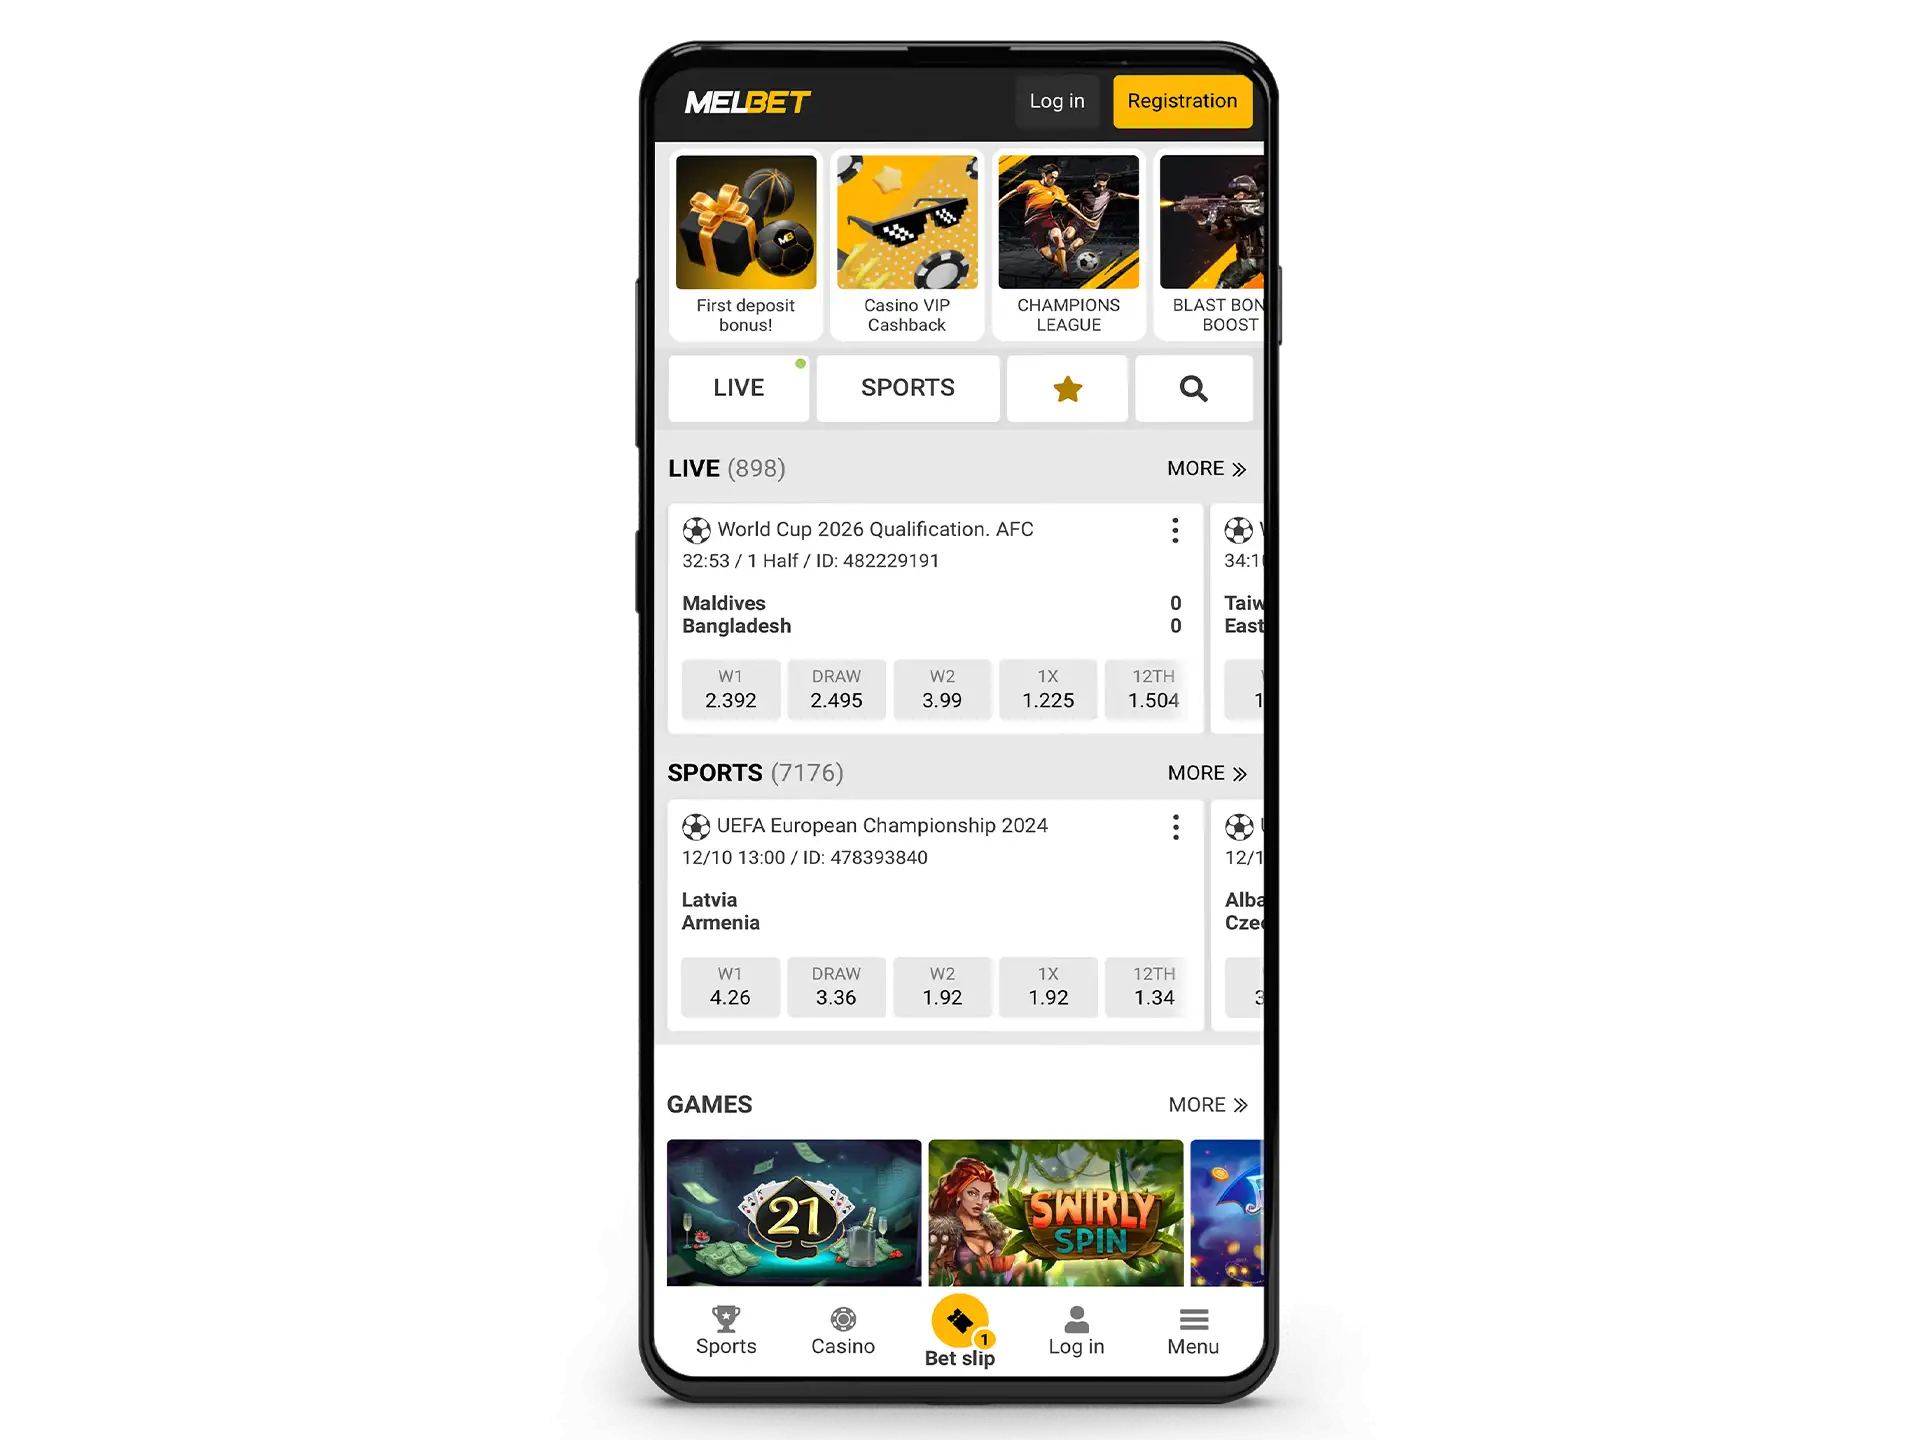 Install the Melbet app on your smartphone and start playing.